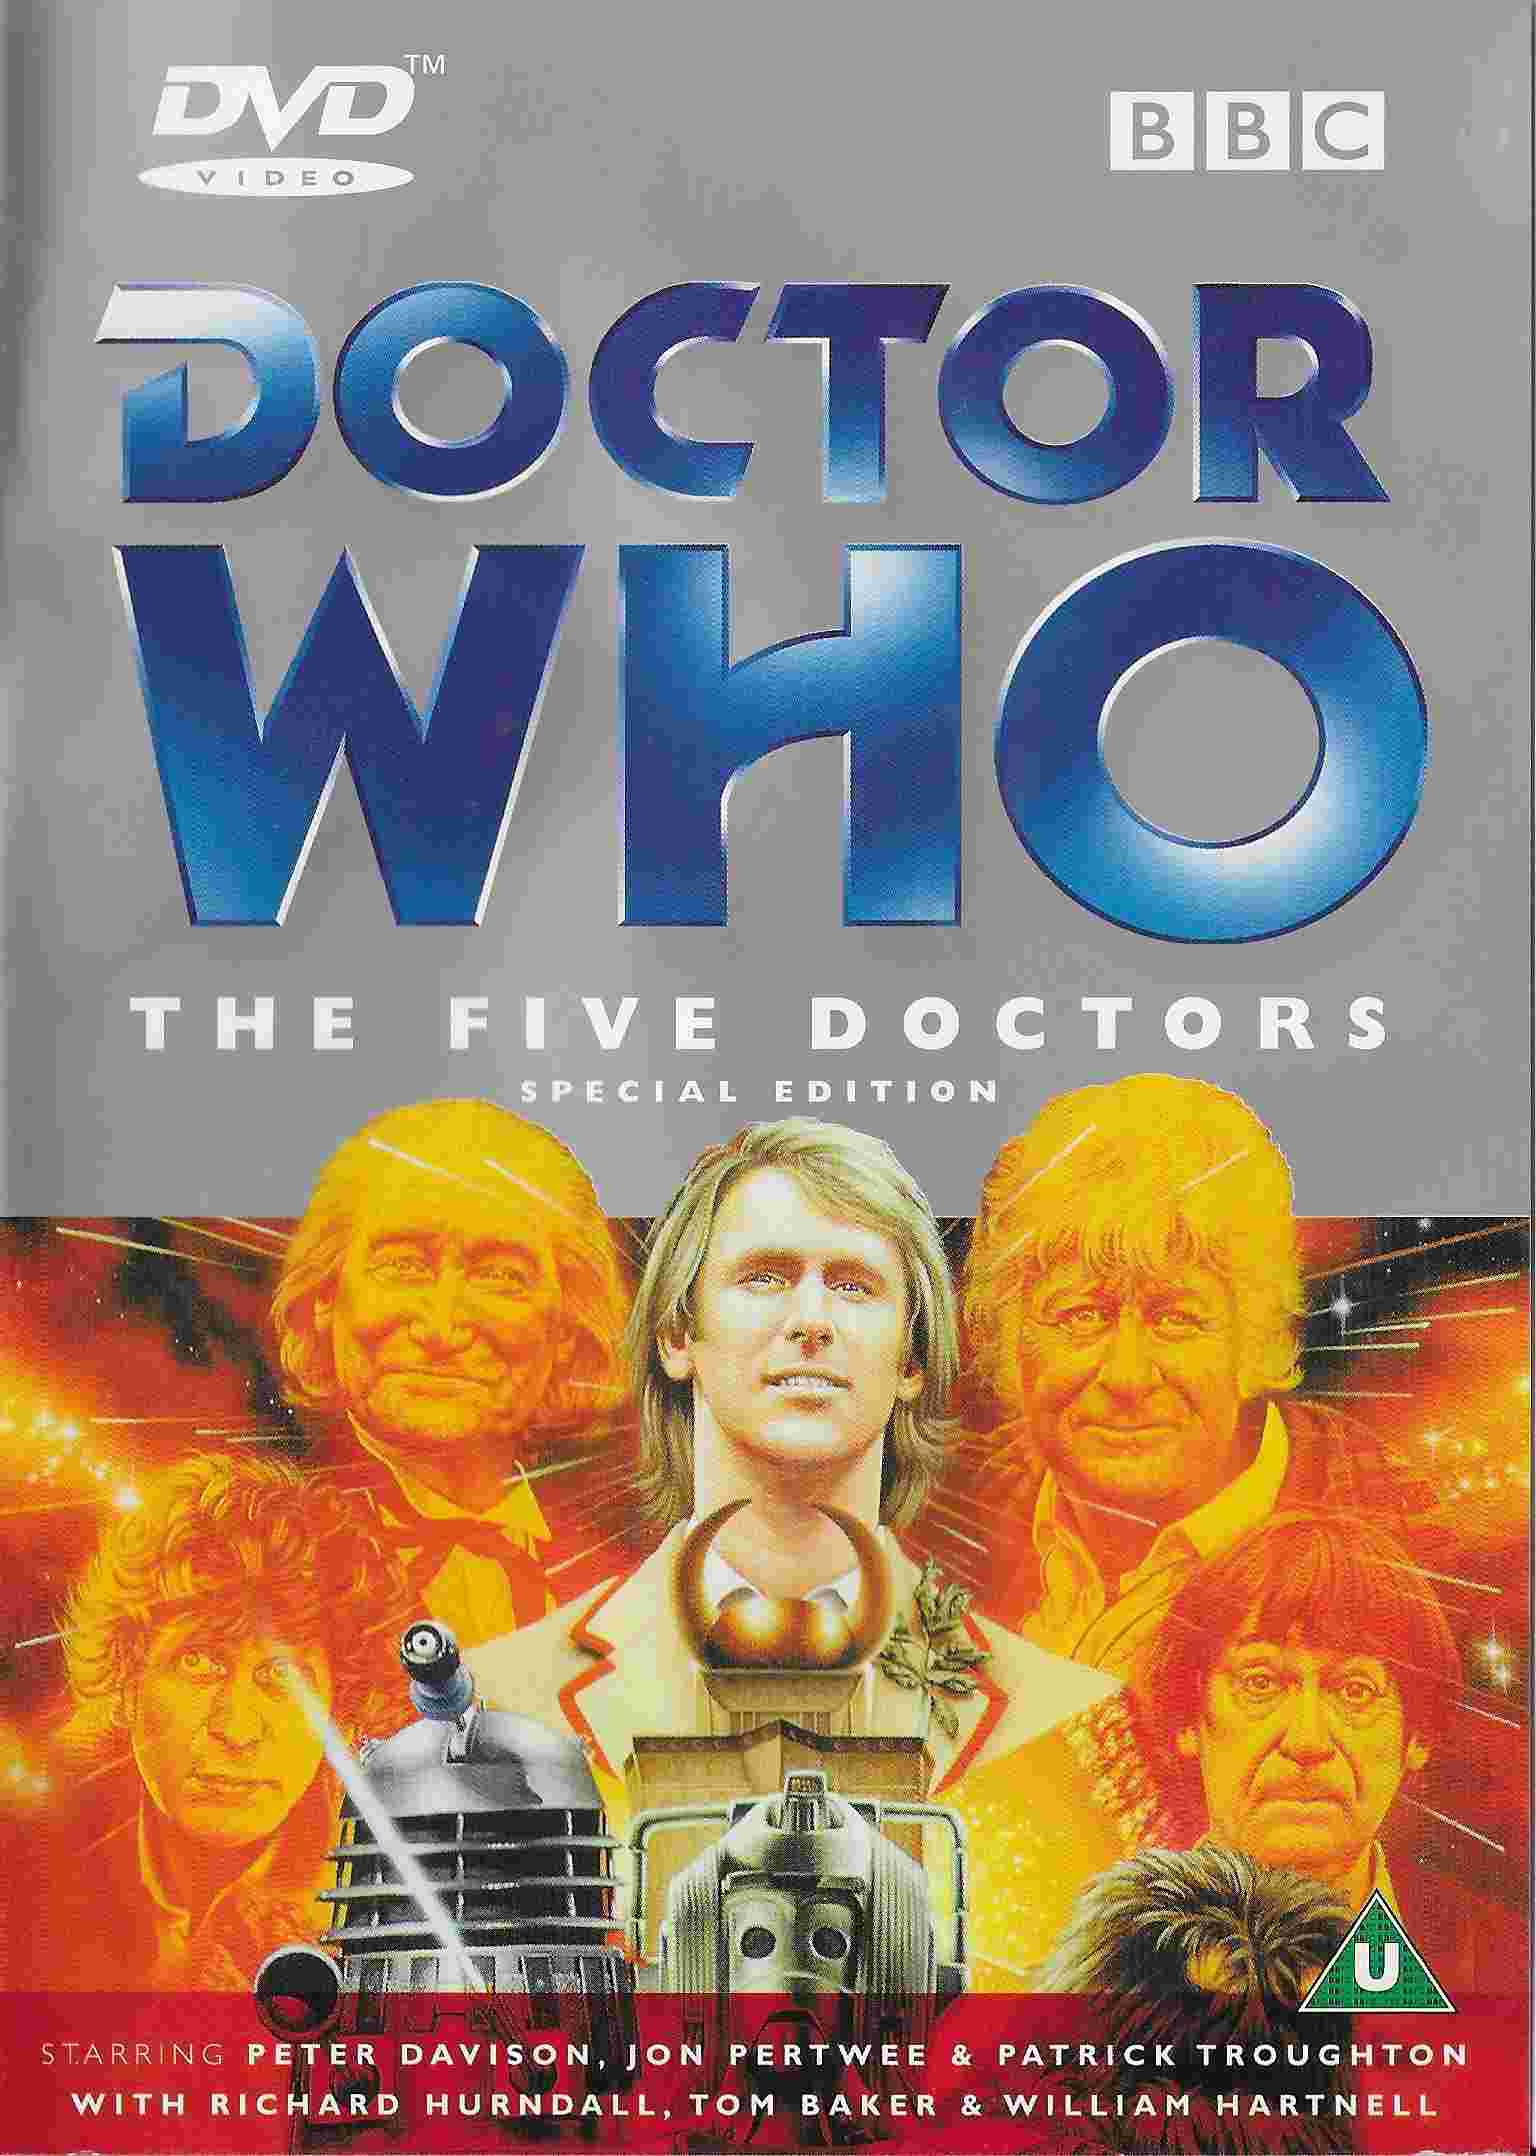 Picture of BBCDVD 1006 Doctor Who - The five Doctors by artist Terrance Dicks from the BBC dvds - Records and Tapes library